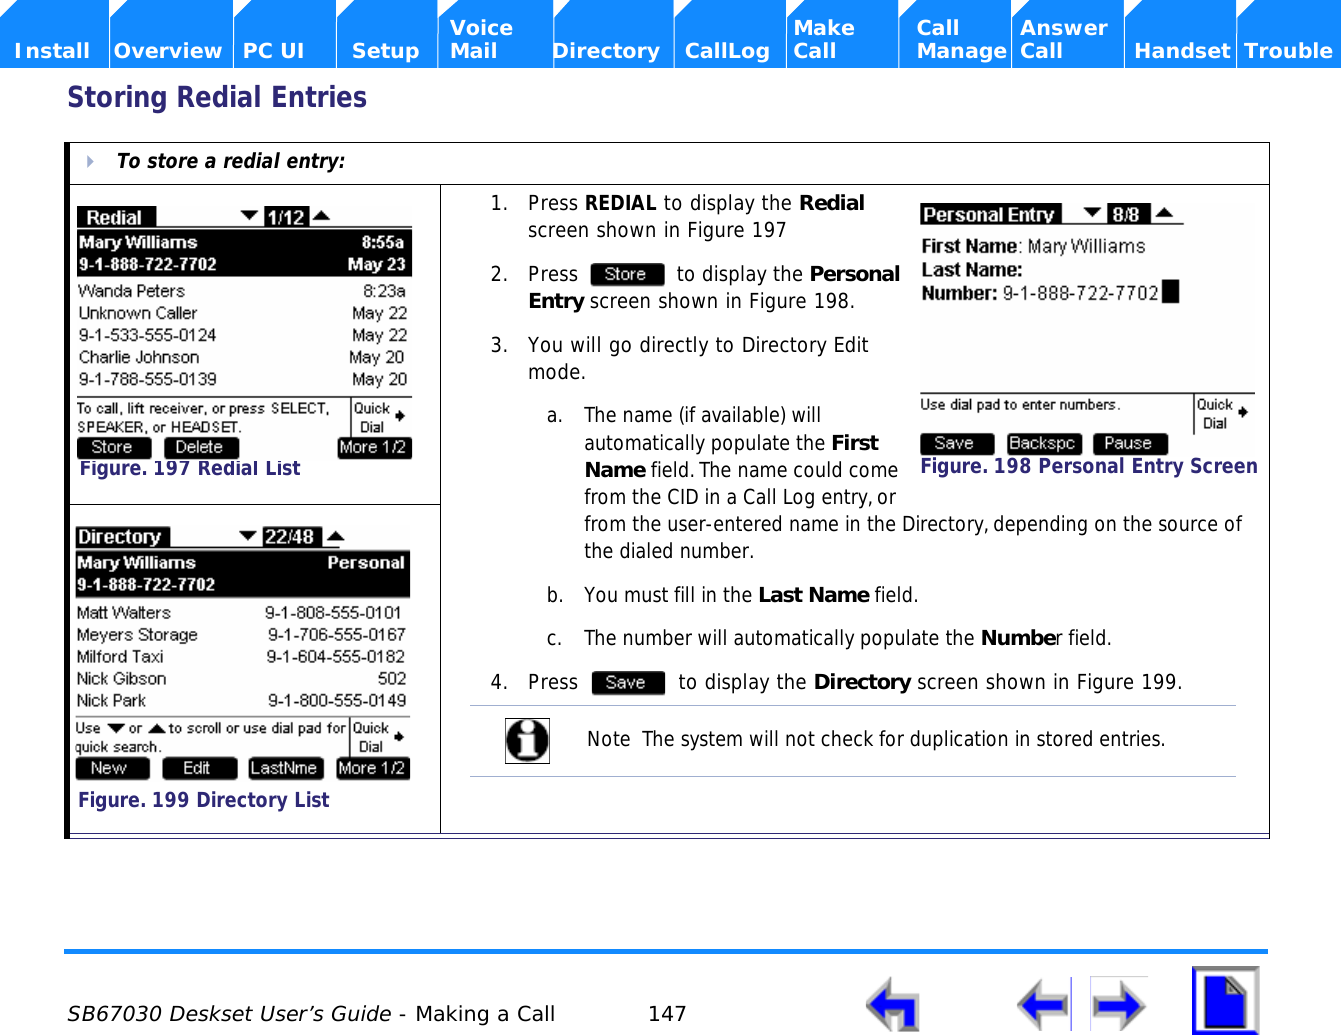  SB67030 Deskset User’s Guide - Making a Call 147    Voice Make Call Answer  Install Overview PC UI Setup Mail Directory CallLog Call Manage Call Handset TroubleStoring Redial EntriesTo store a redial entry:1. Press REDIAL to display the Redial screen shown in Figure 1972. Press   to display the Personal Entry screen shown in Figure 198.3. You will go directly to Directory Edit mode.a. The name (if available) will automatically populate the First Name field. The name could come from the CID in a Call Log entry, or from the user-entered name in the Directory, depending on the source of the dialed number.b. You must fill in the Last Name field. c. The number will automatically populate the Number field.4. Press   to display the Directory screen shown in Figure 199.Figure. 197 Redial ListFigure. 198 Personal Entry ScreenNote  The system will not check for duplication in stored entries.Figure. 199 Directory List